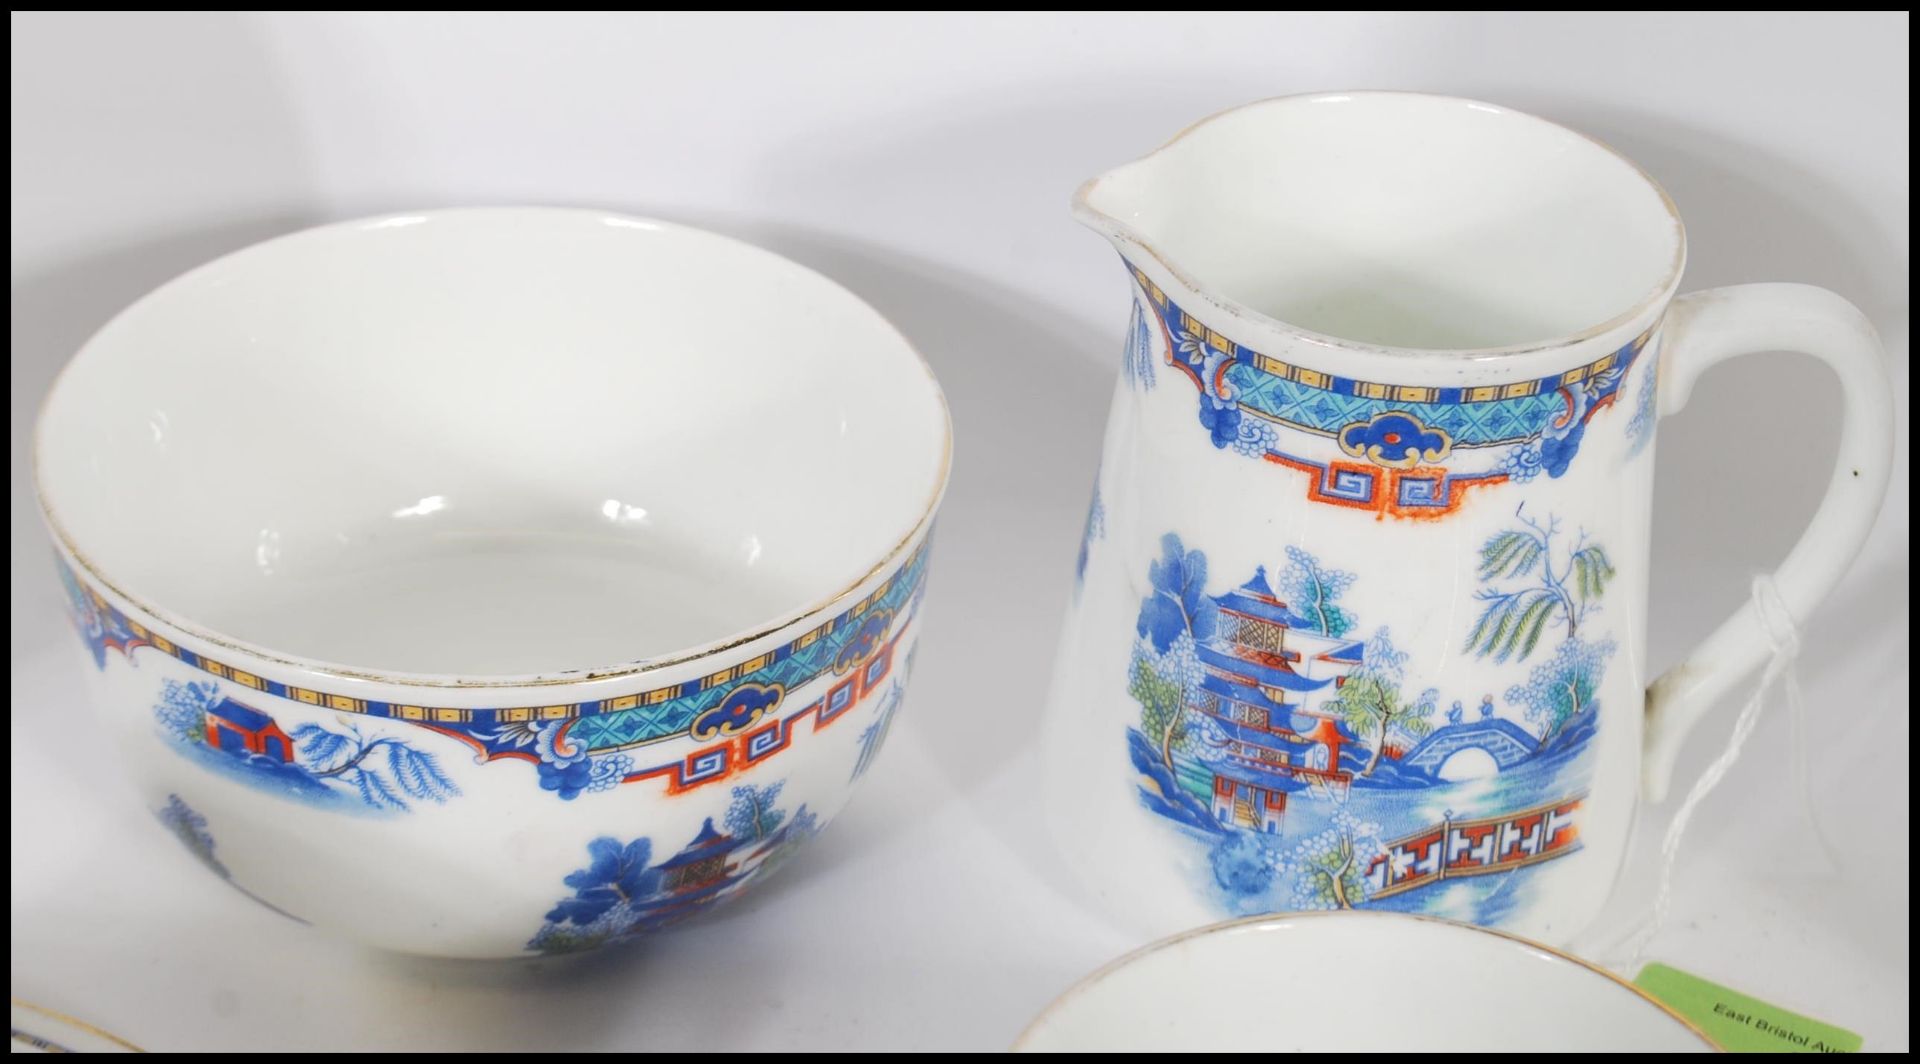 A 20th Century Staffordshire blue and white tea service in the Willow pattern, having red and - Image 5 of 8